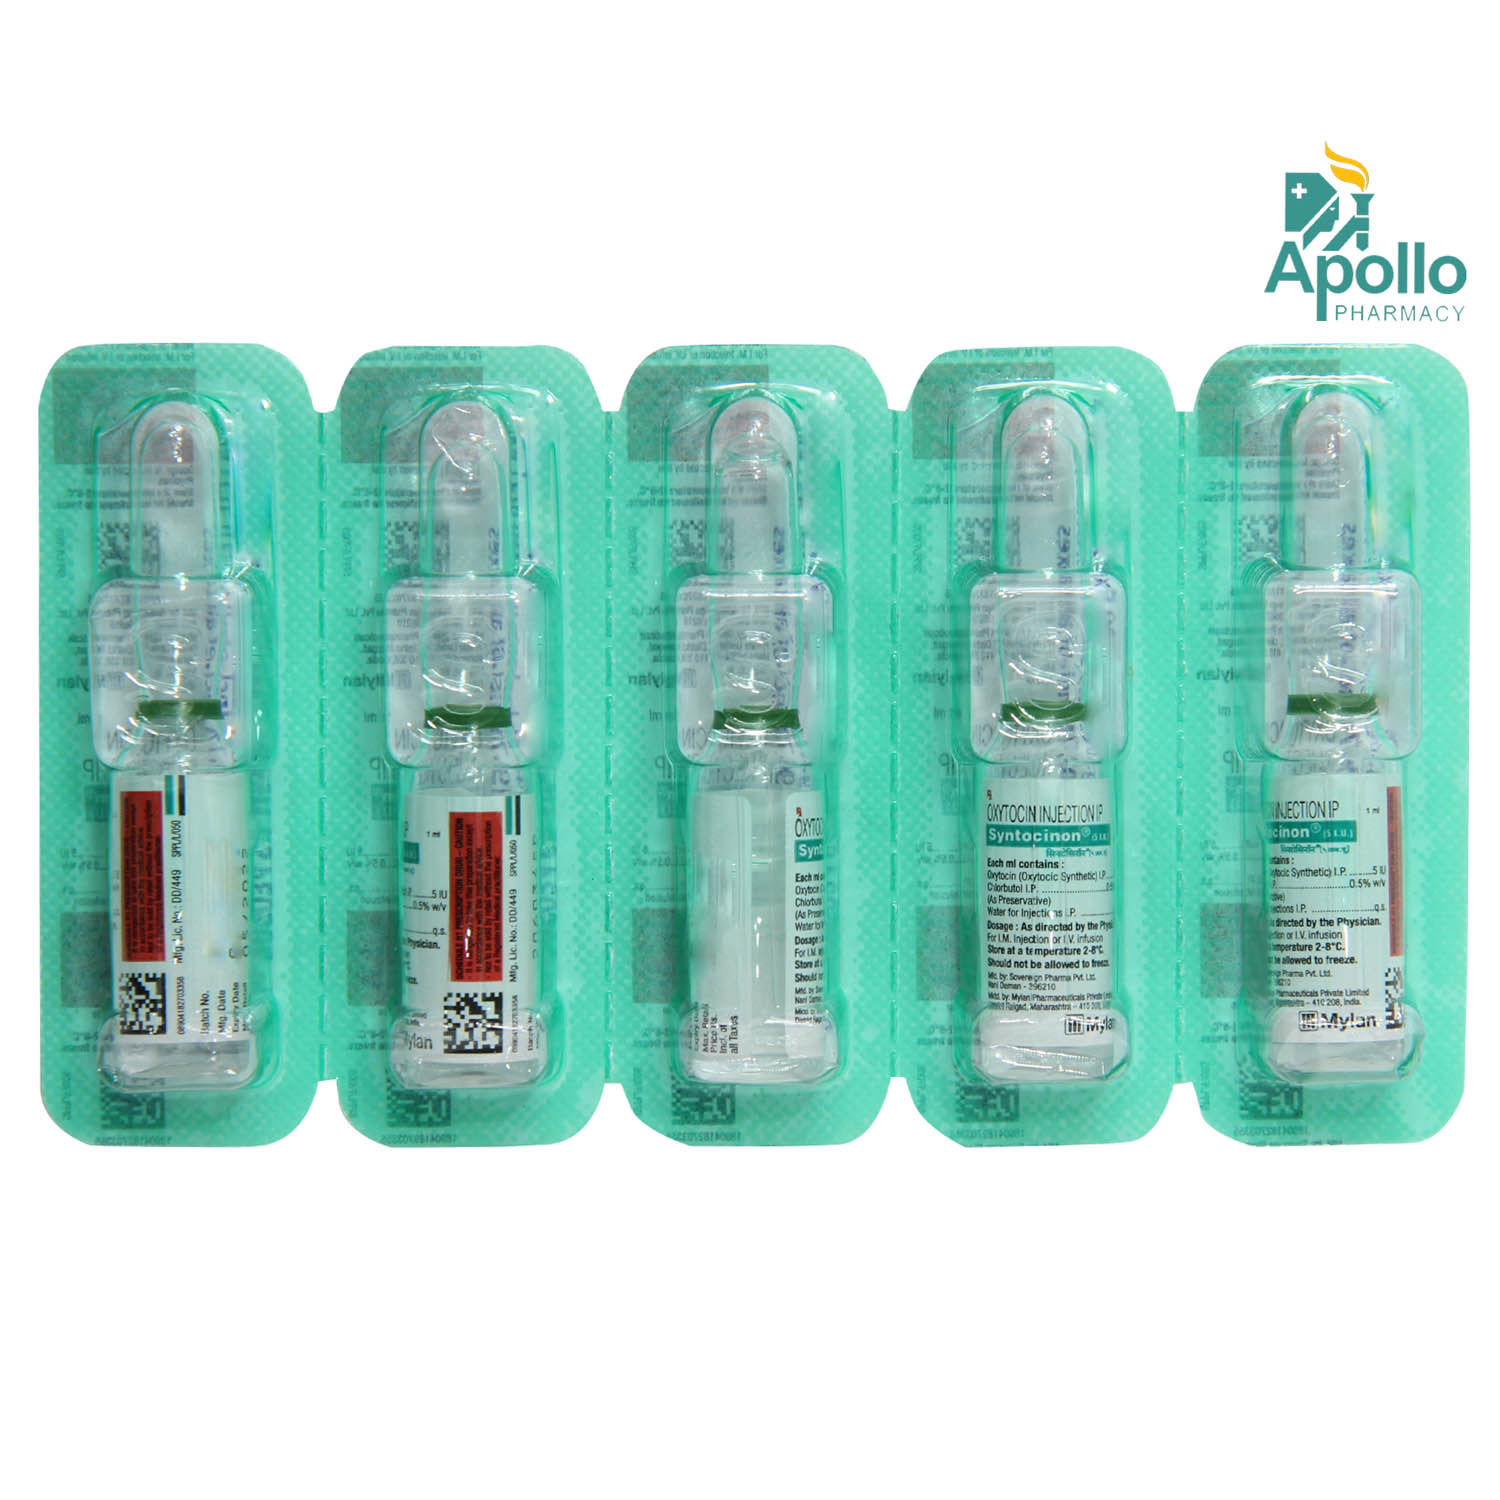 Buy Syntocinon Injection 1 ml Online